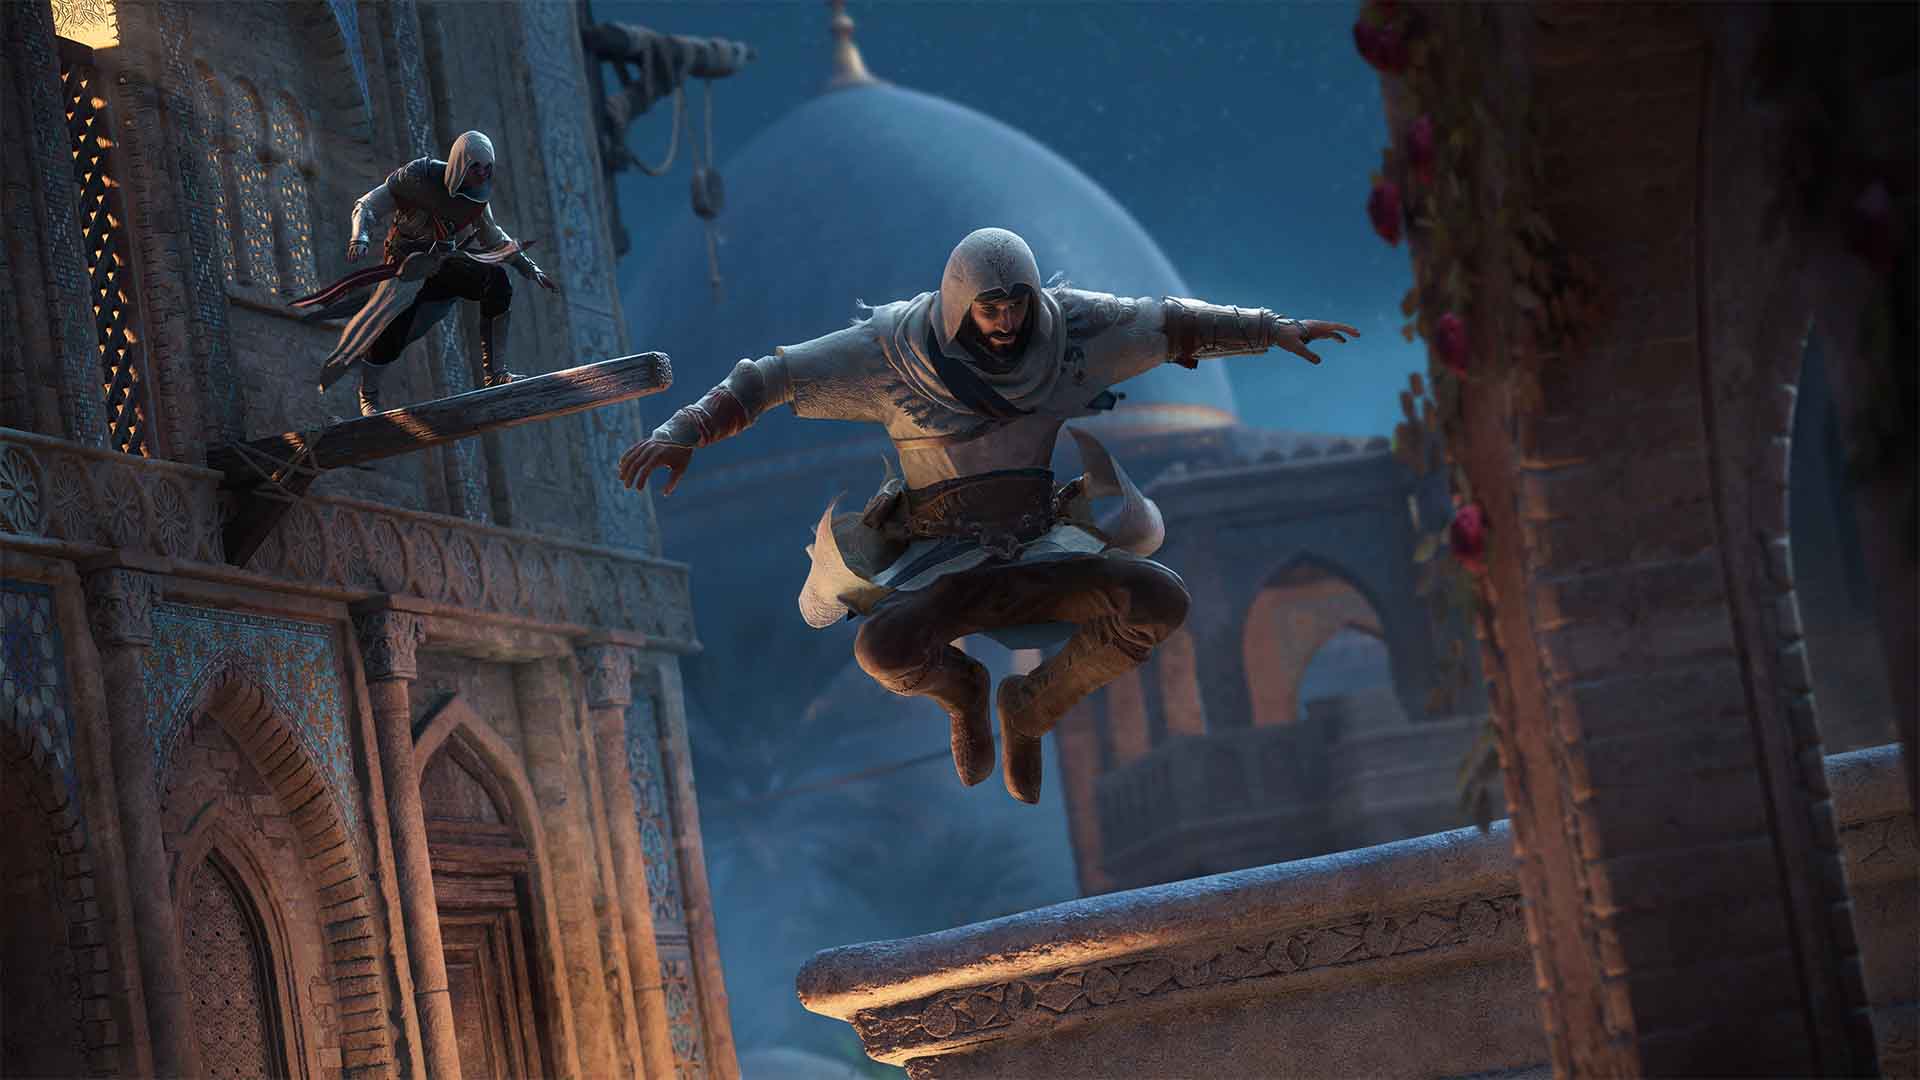 Assassin's Creed Jade: Expected release date and the latest rumors